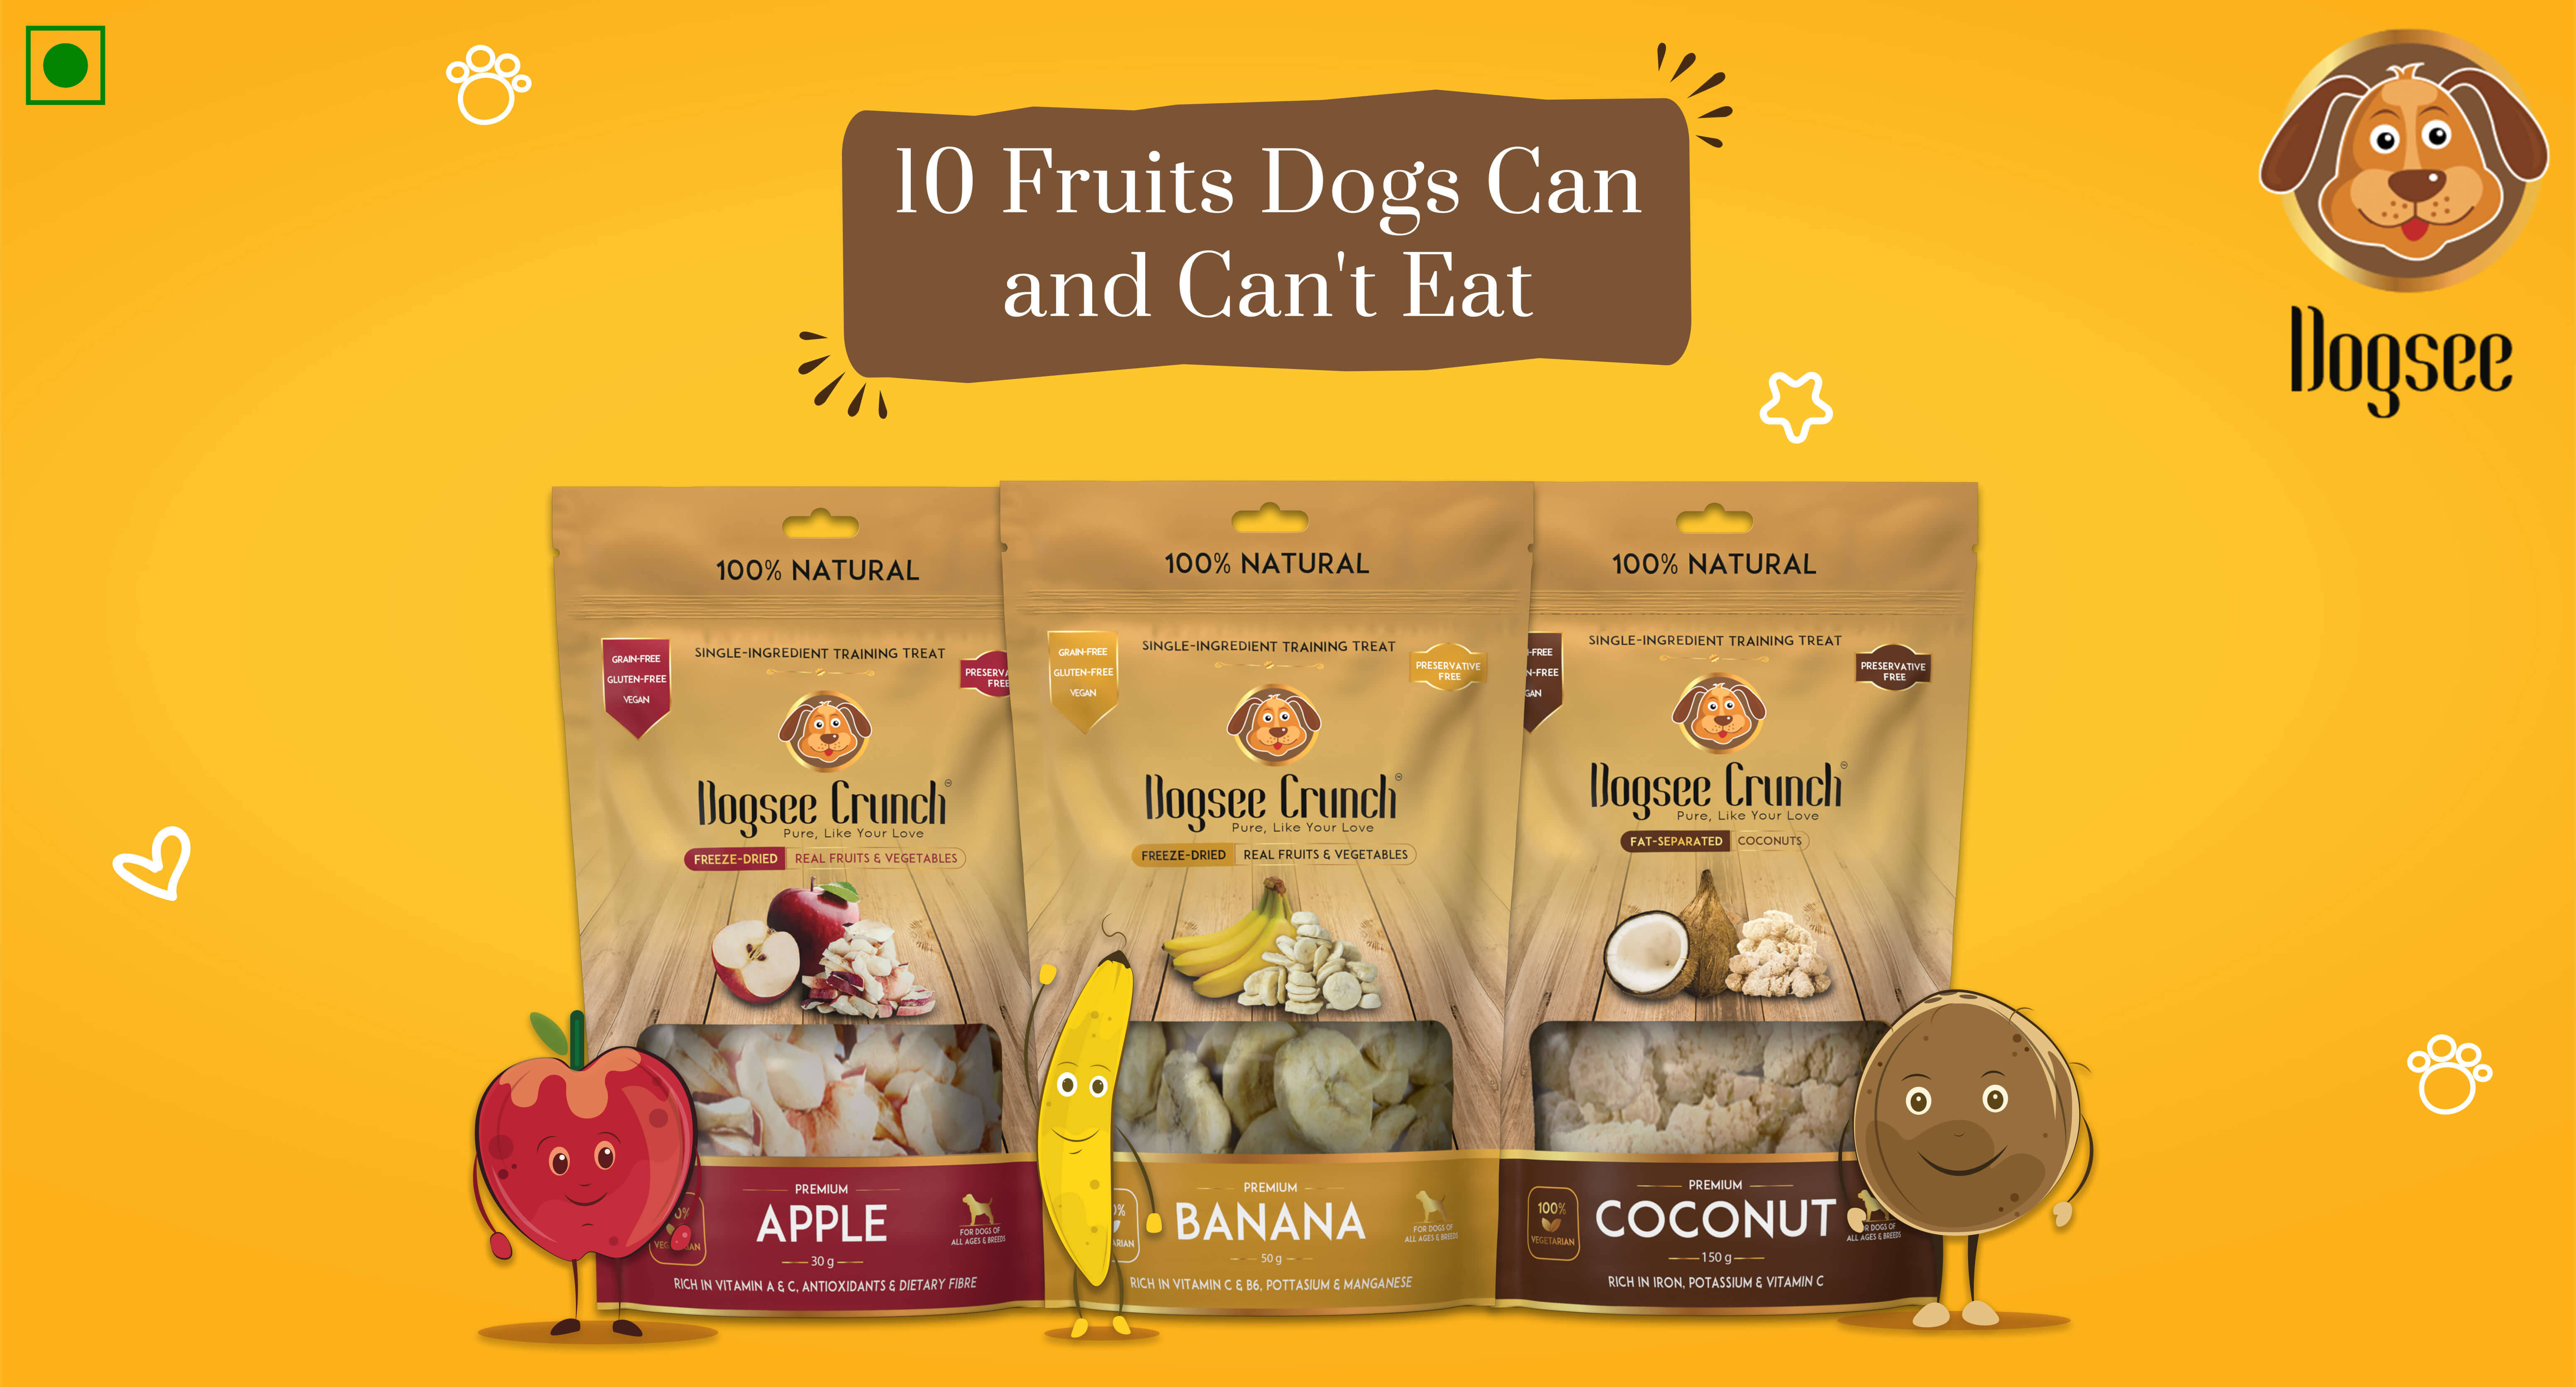 ﻿10 Fruits Dogs Can and Can